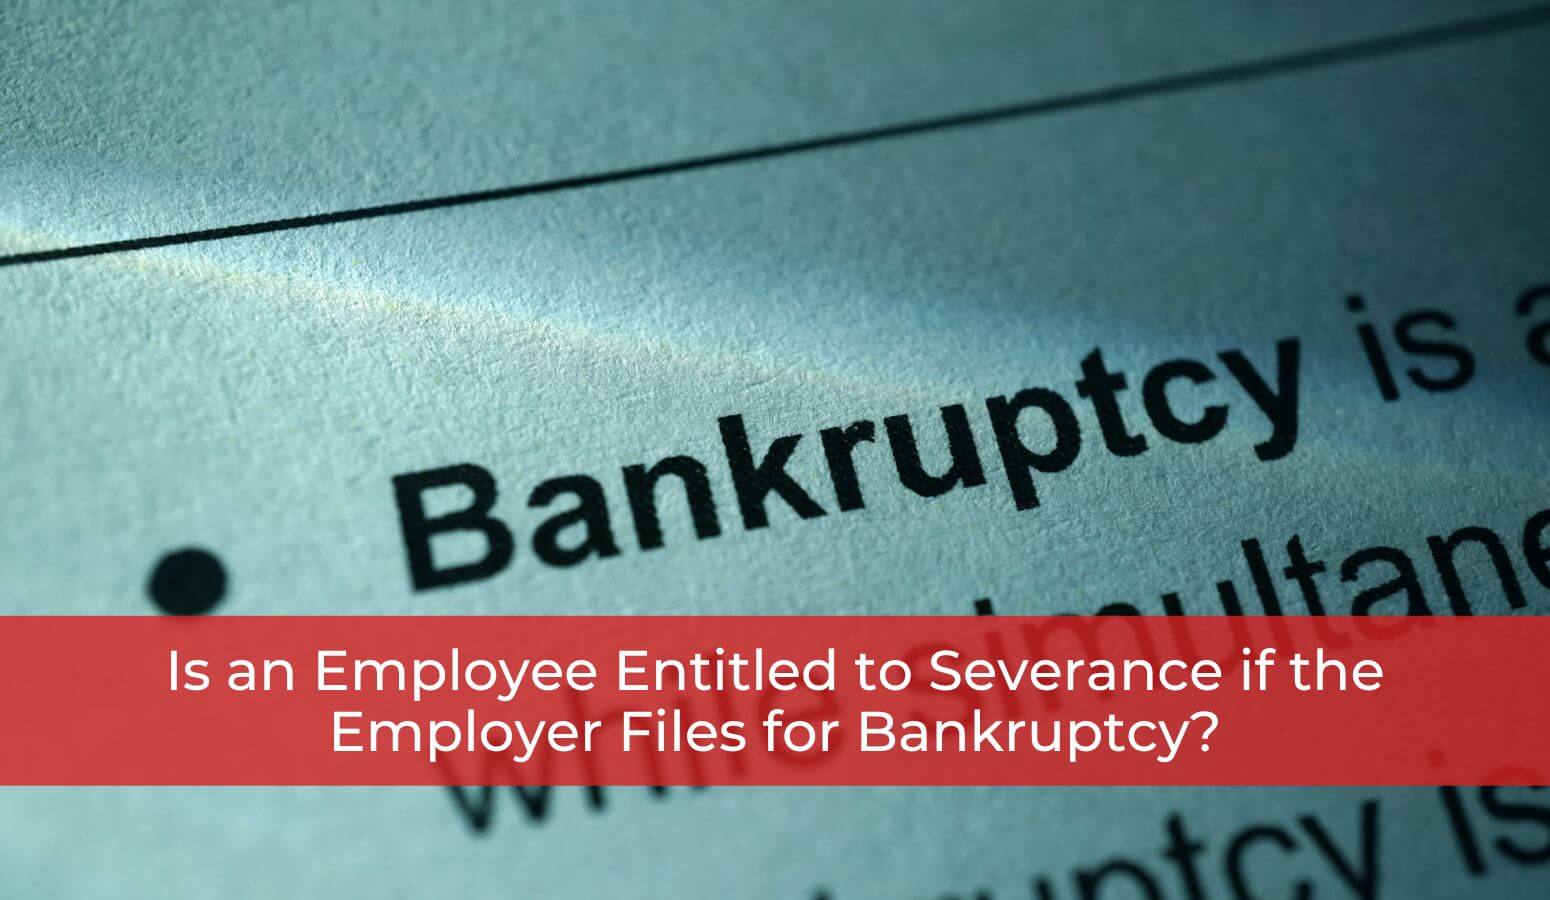 Featured image for “Is an Employee Entitled to Severance if the Employer Files for Bankruptcy?”